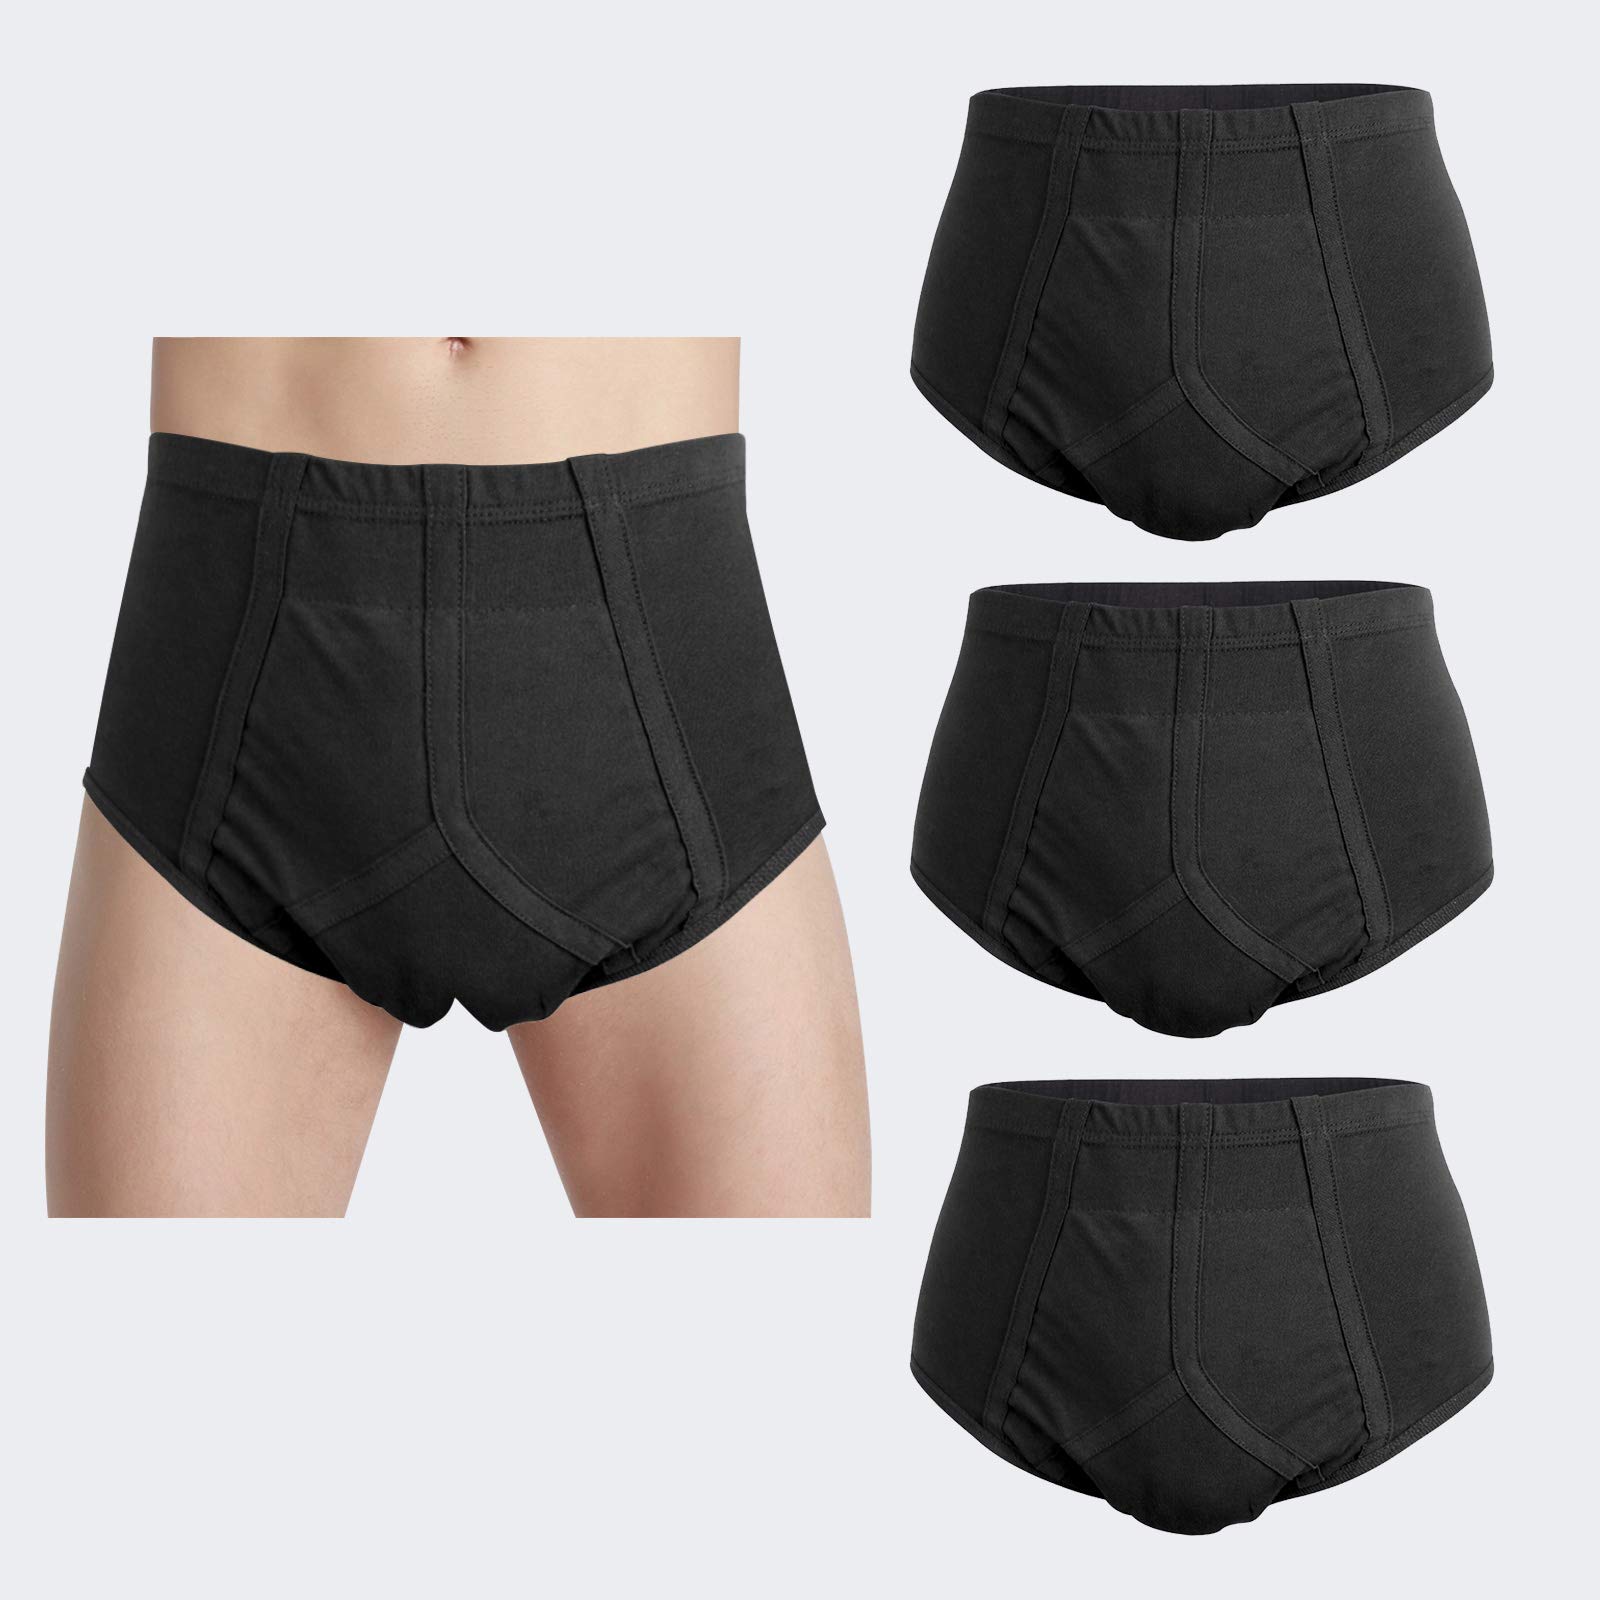 Washable Urinary Incontinence Underwear for Men, 5 Longer Leg Front  Absorbent Boxer Brief for Bladder Control (XX-Large, Black)